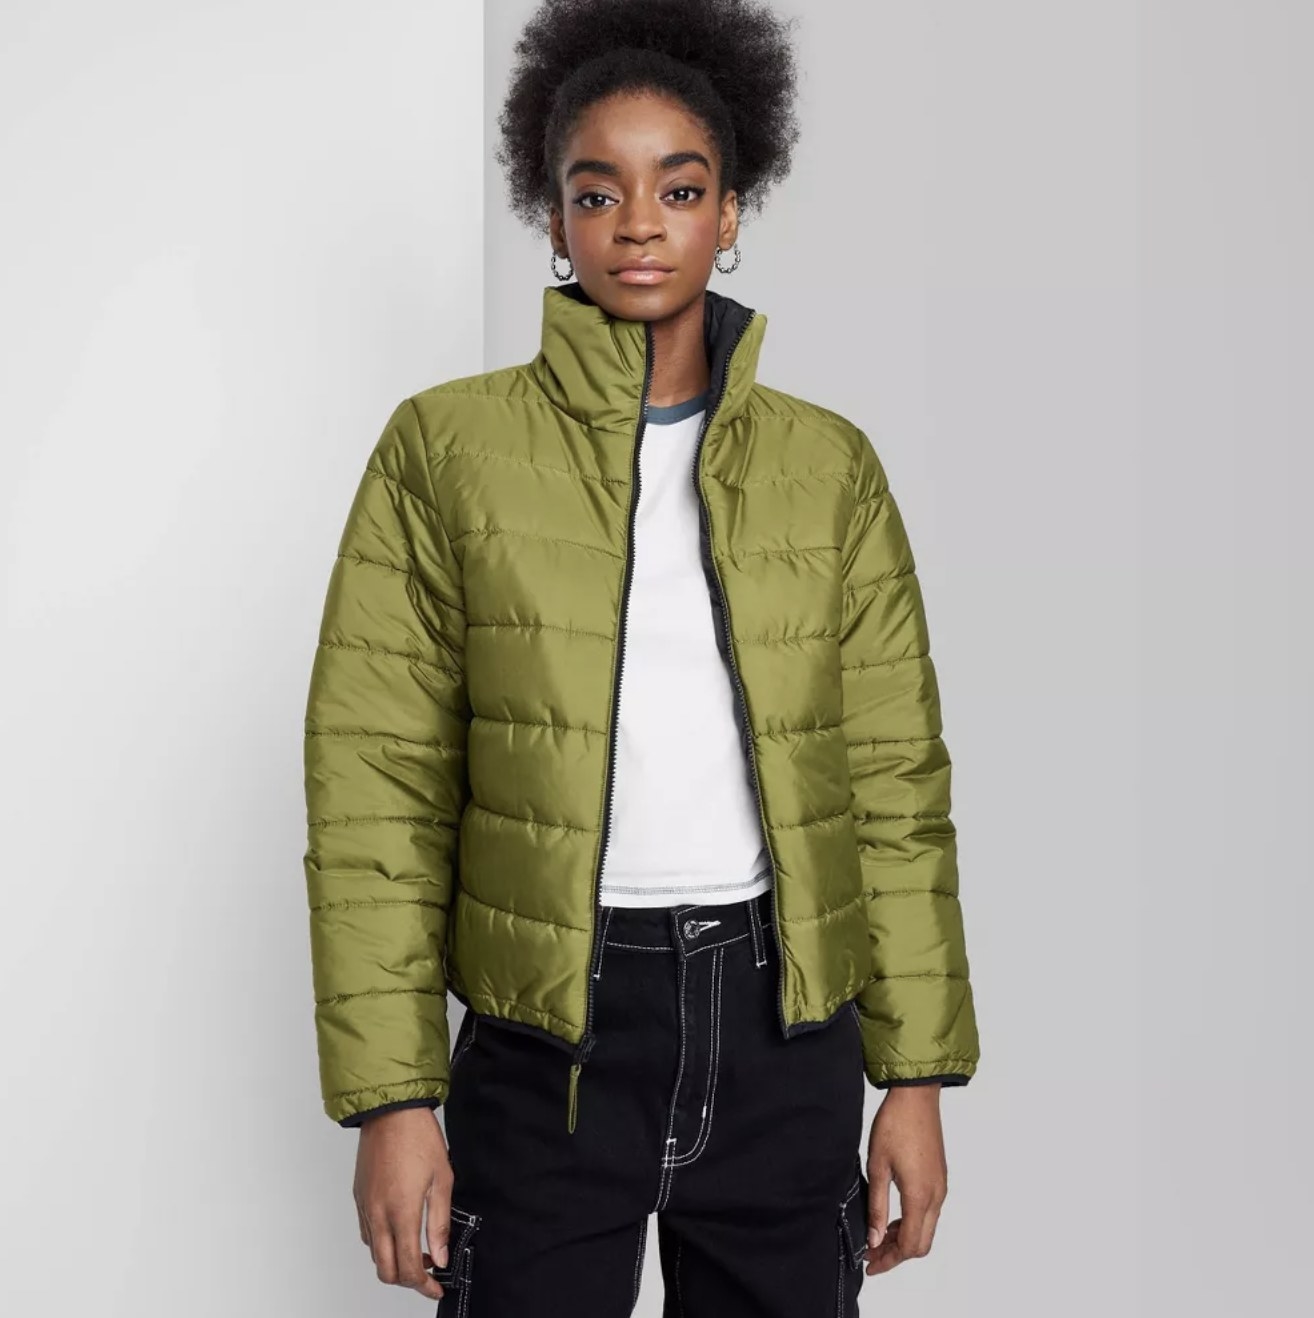 the jacket in an olive green